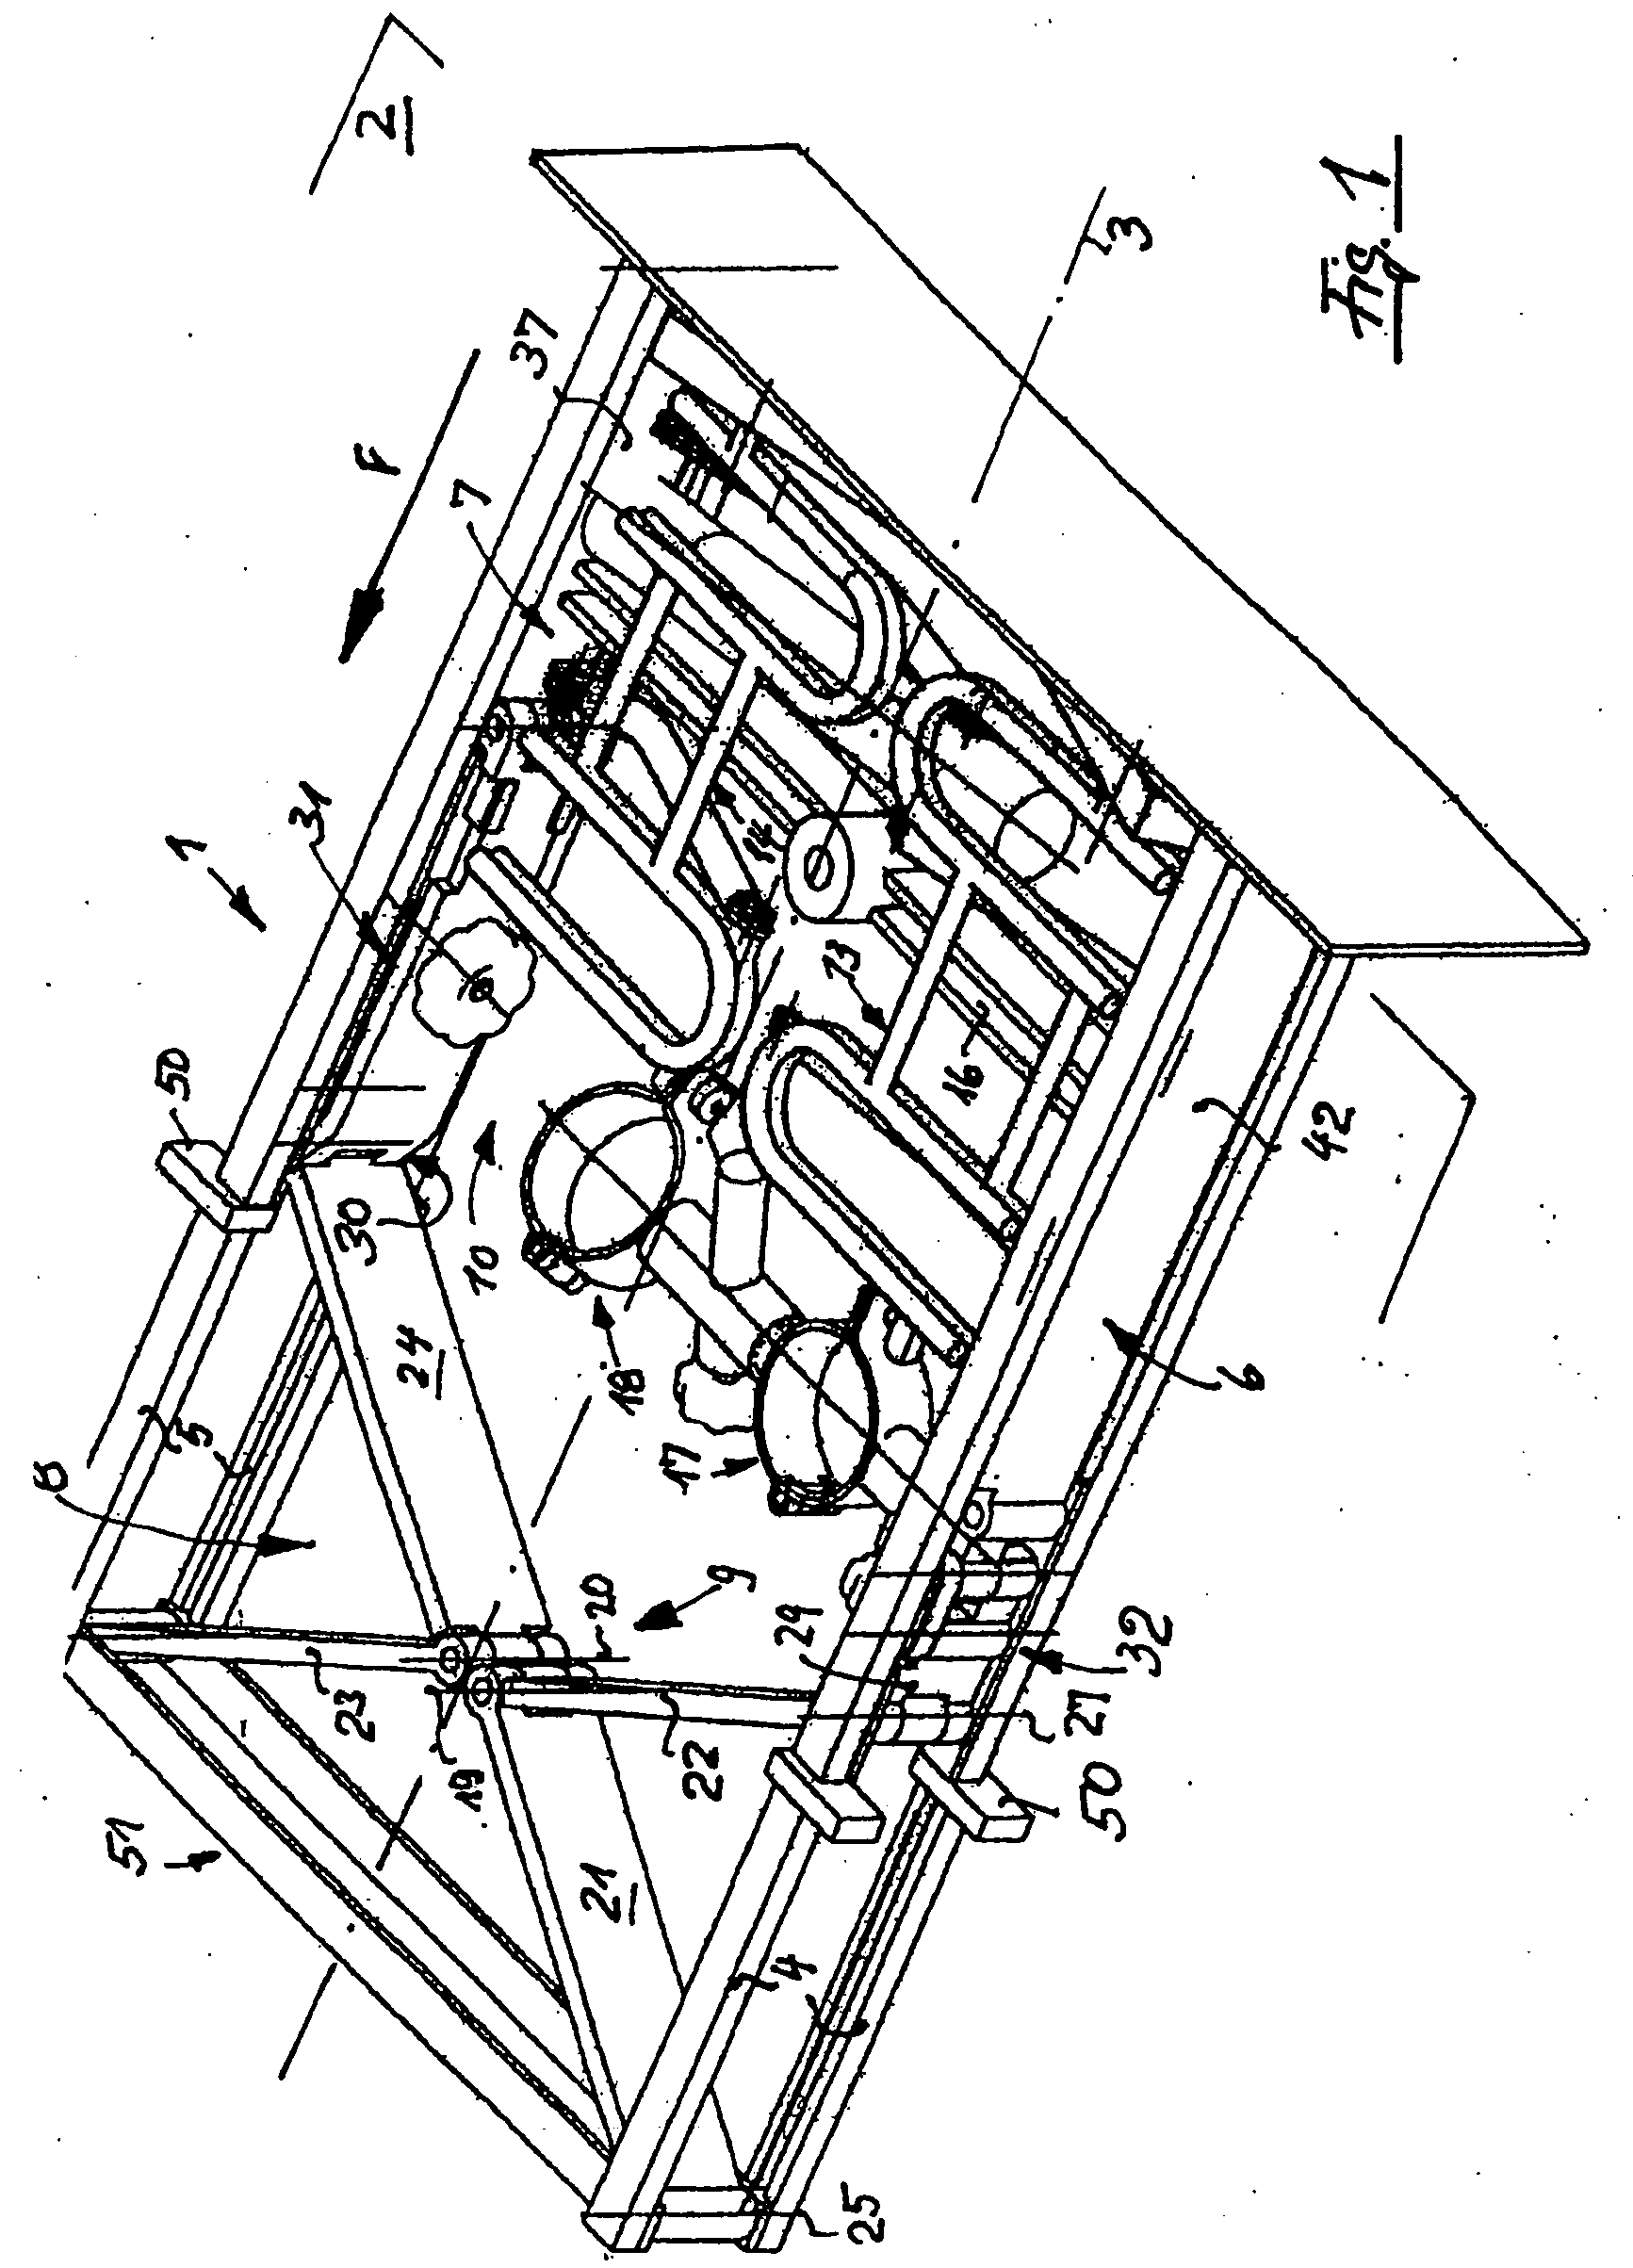 Load carrier for motor vehicles